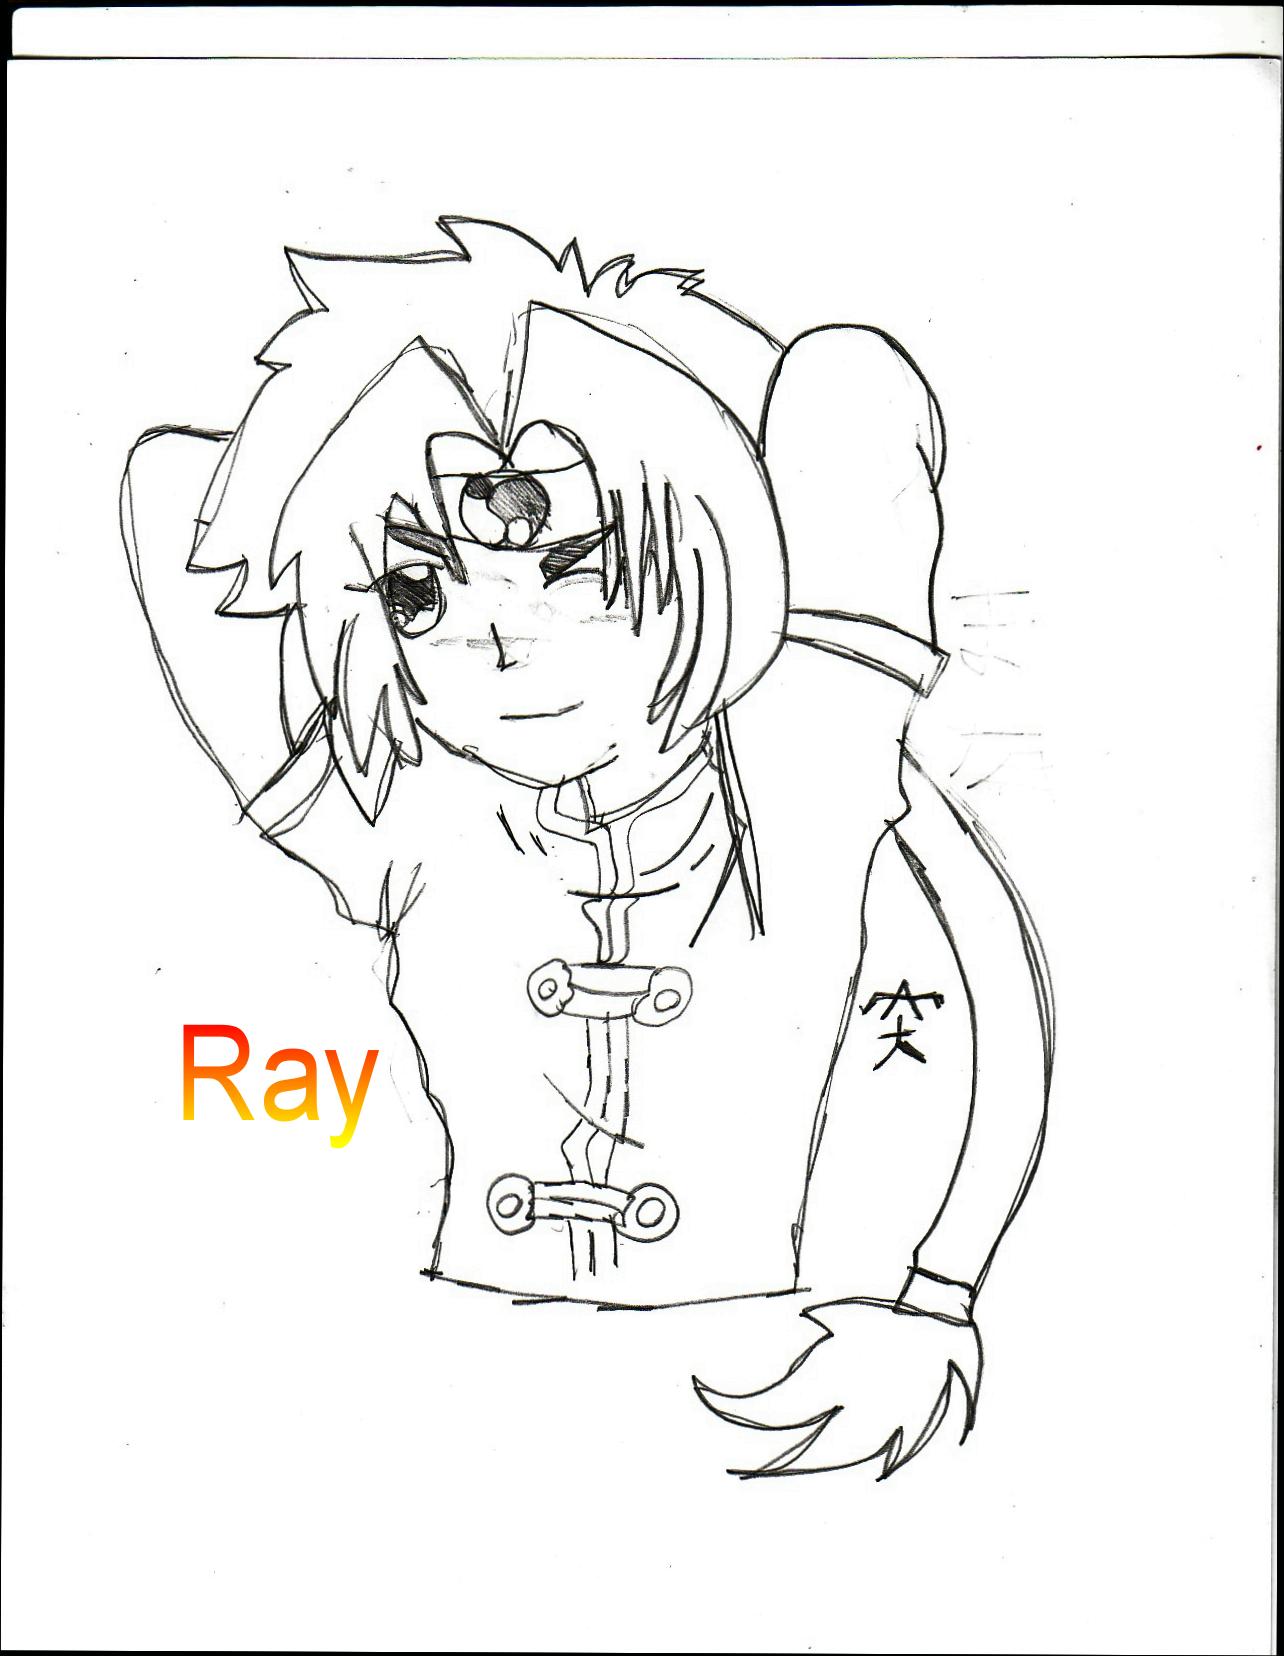 Sexy Ray by Raylover345678